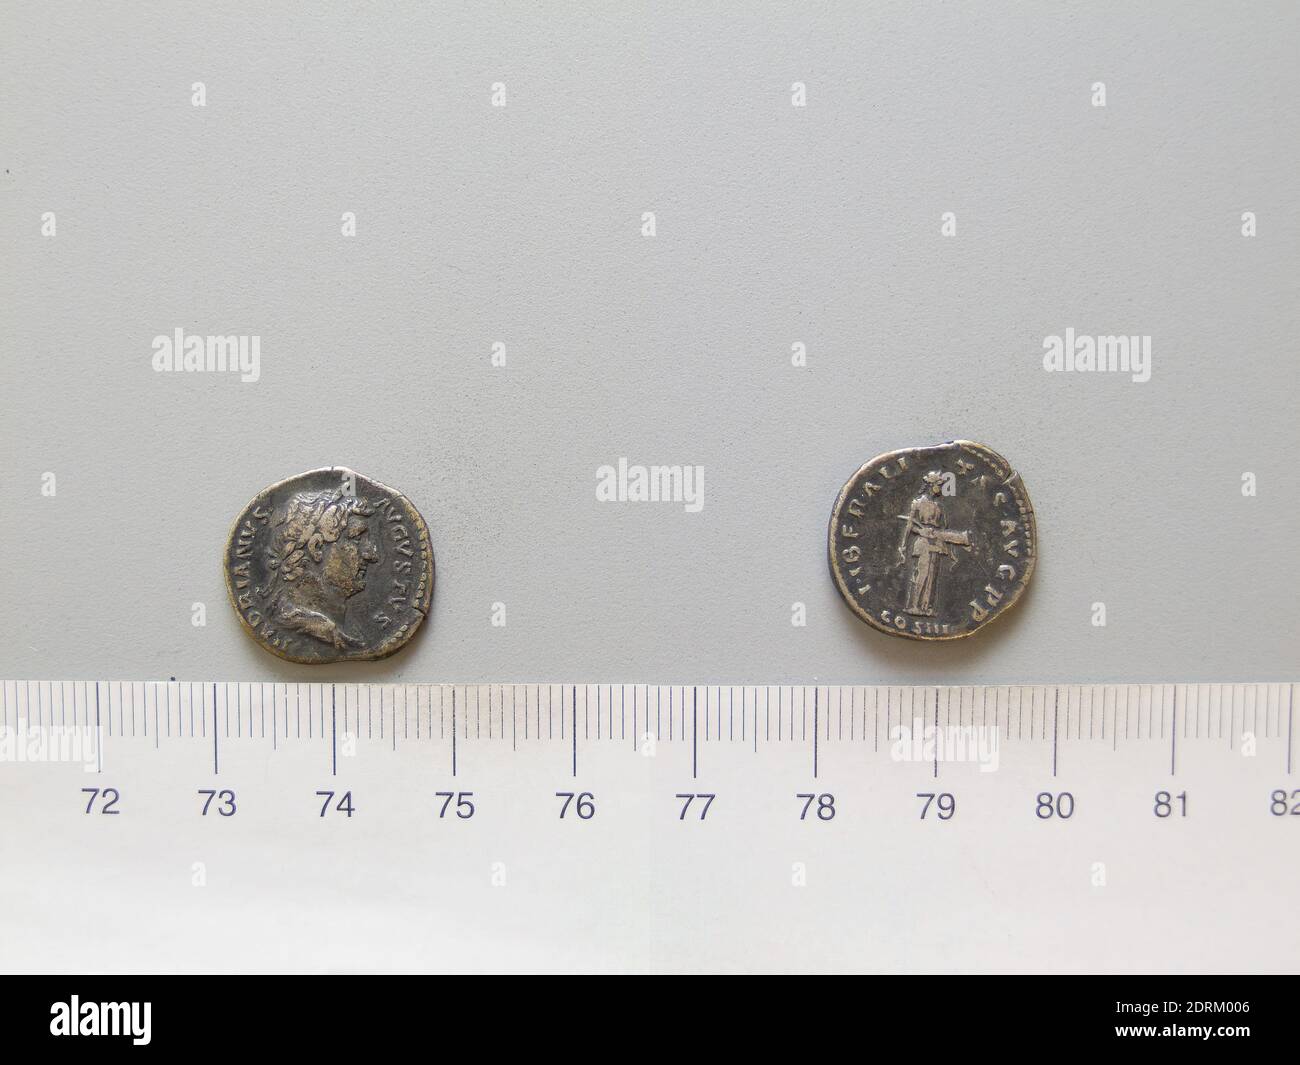 Ruler: Hadrian, Emperor of Rome, A.D. 76–138, ruled 117–38, Mint: Rome, Denarius of Hadrian, Emperor of Rome from Rome, 132–34, Silver, 2.99 g, 7:00, 17.8 mm, Made in Rome, Italy, Roman, 2nd century A.D., Numismatics Stock Photo